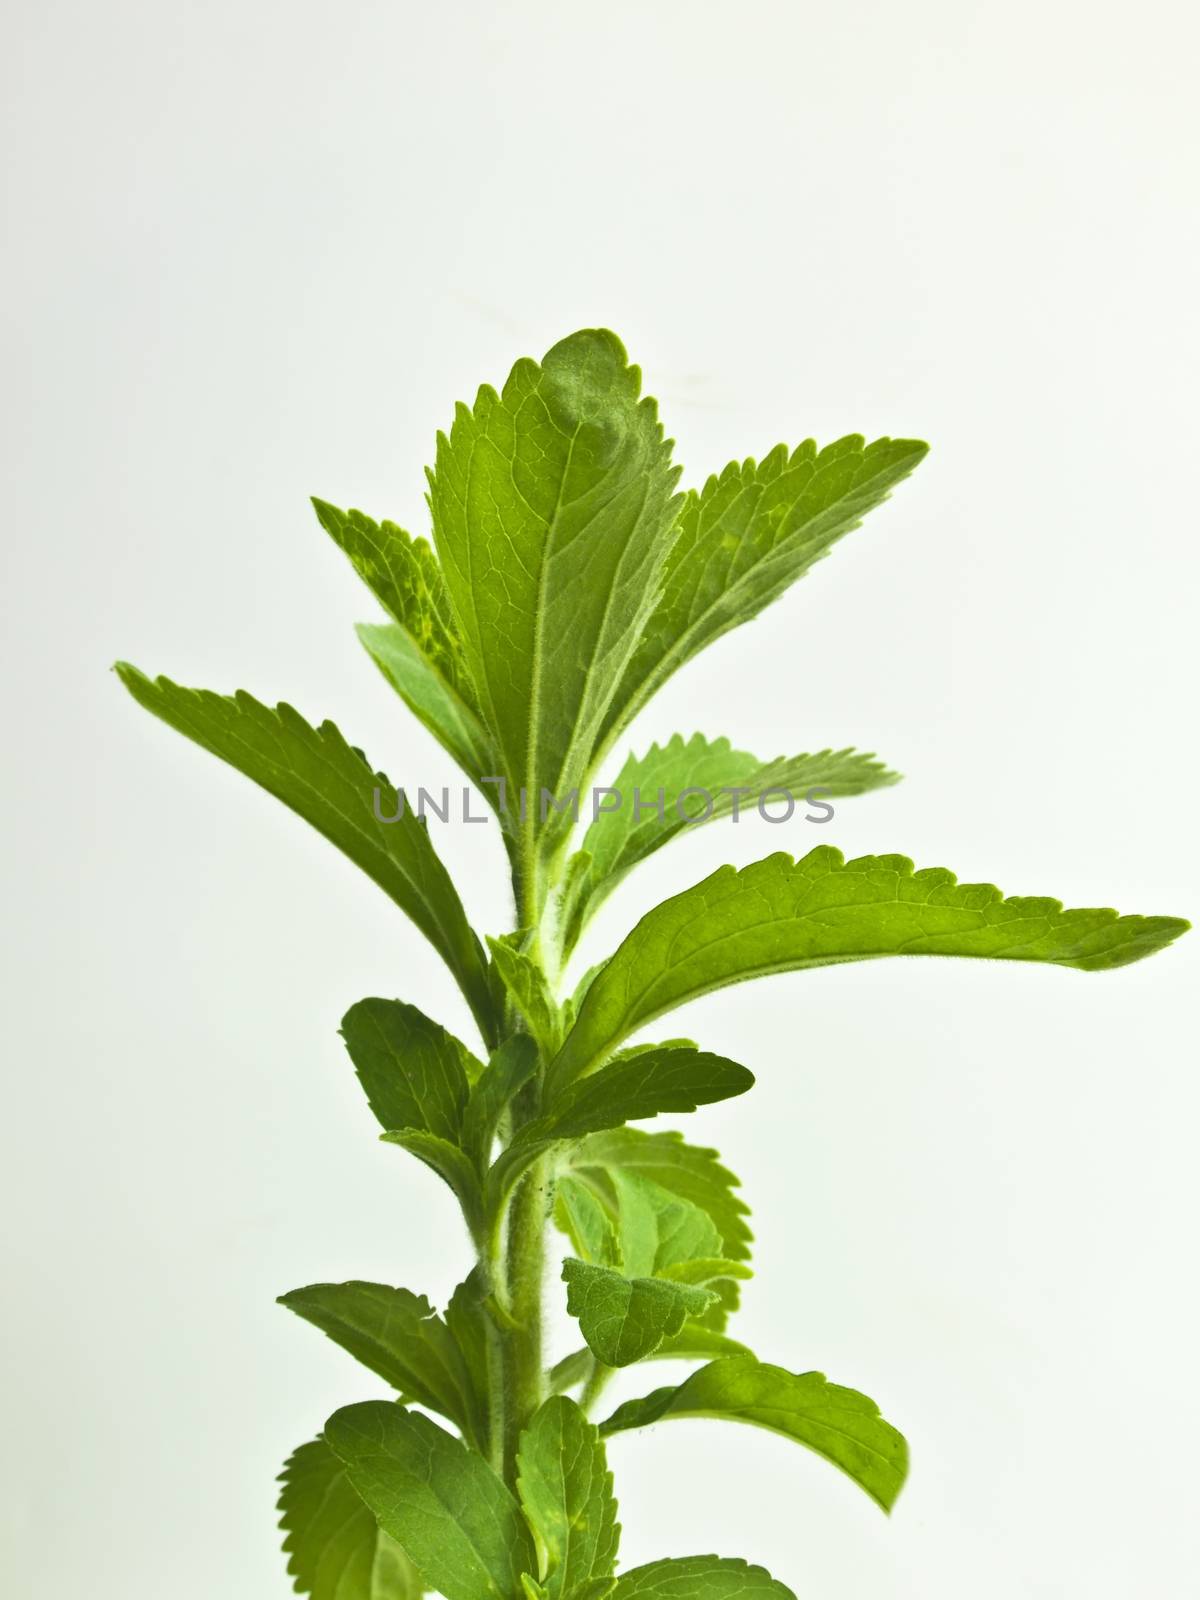 the support for sugar of the Stevia rebaudiana by Jochen